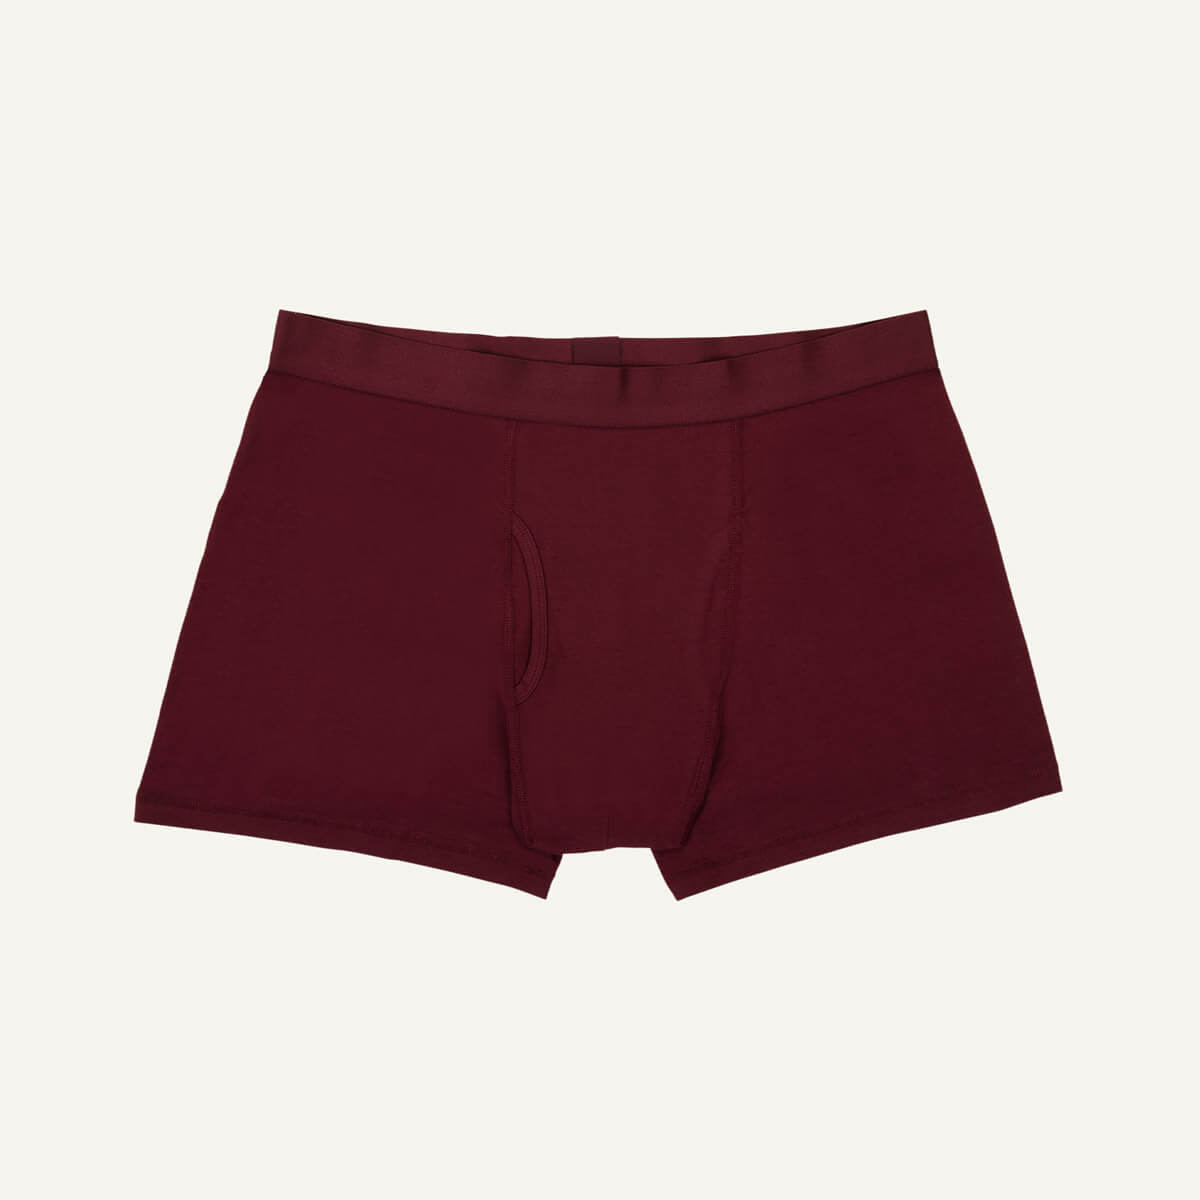 A-dam Burgundy boxer brief with peaches from GOTS pure organic